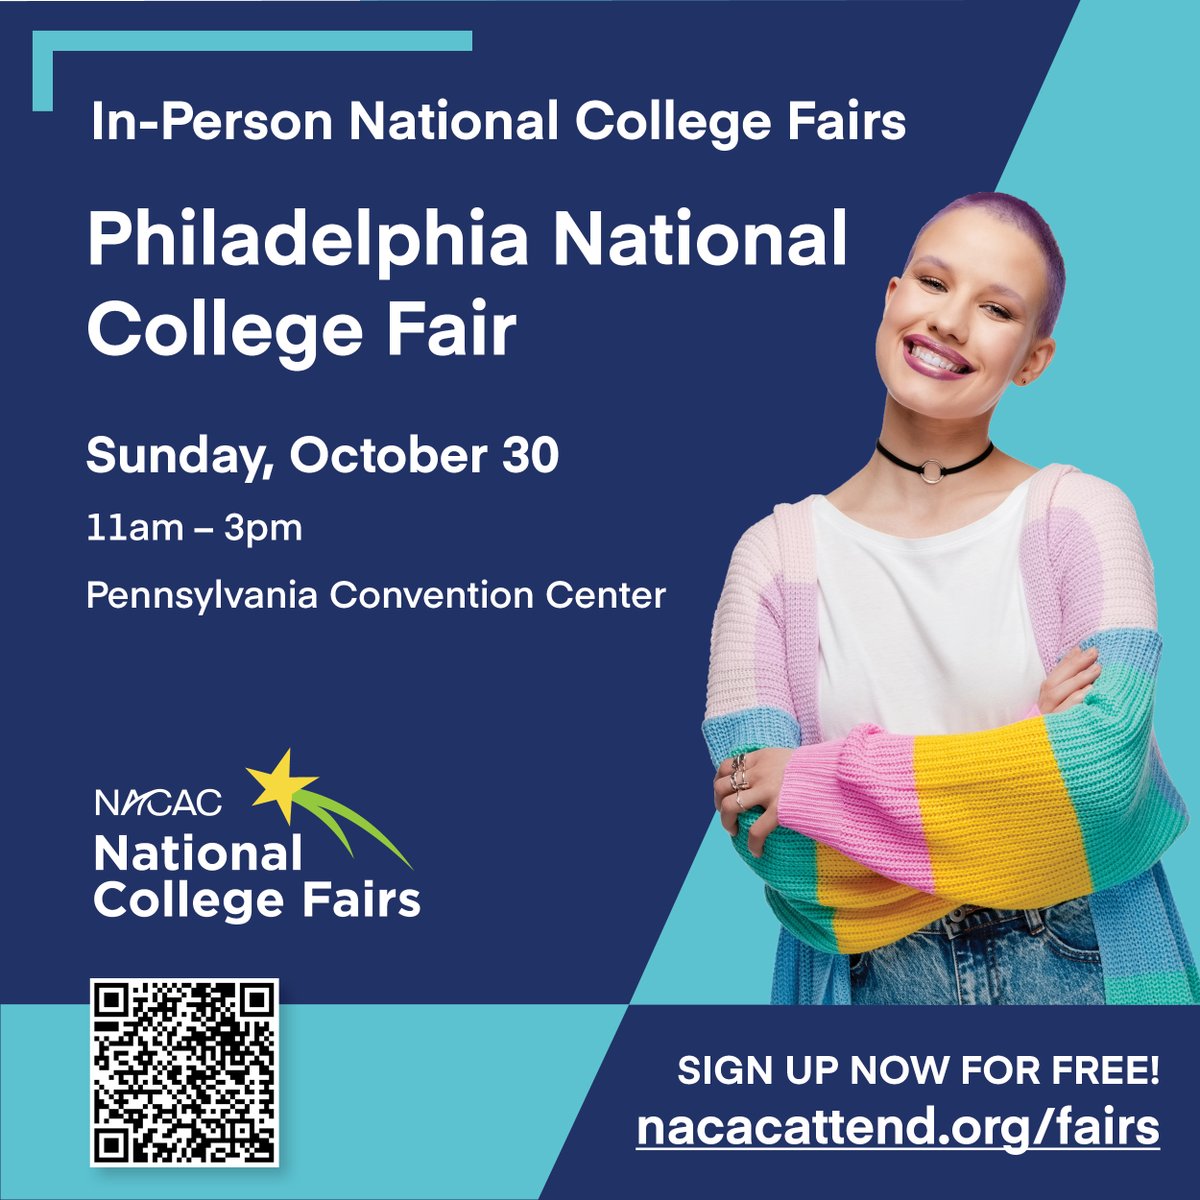 #SpreadtheWord Our next In-Person National College Fairs will be held on Sunday, Oct 30 in Philadelphia and St. Louis. For more information, visit nacacattend.org/fairs #collegefair #collegefairs #NACAC #NACACfairs